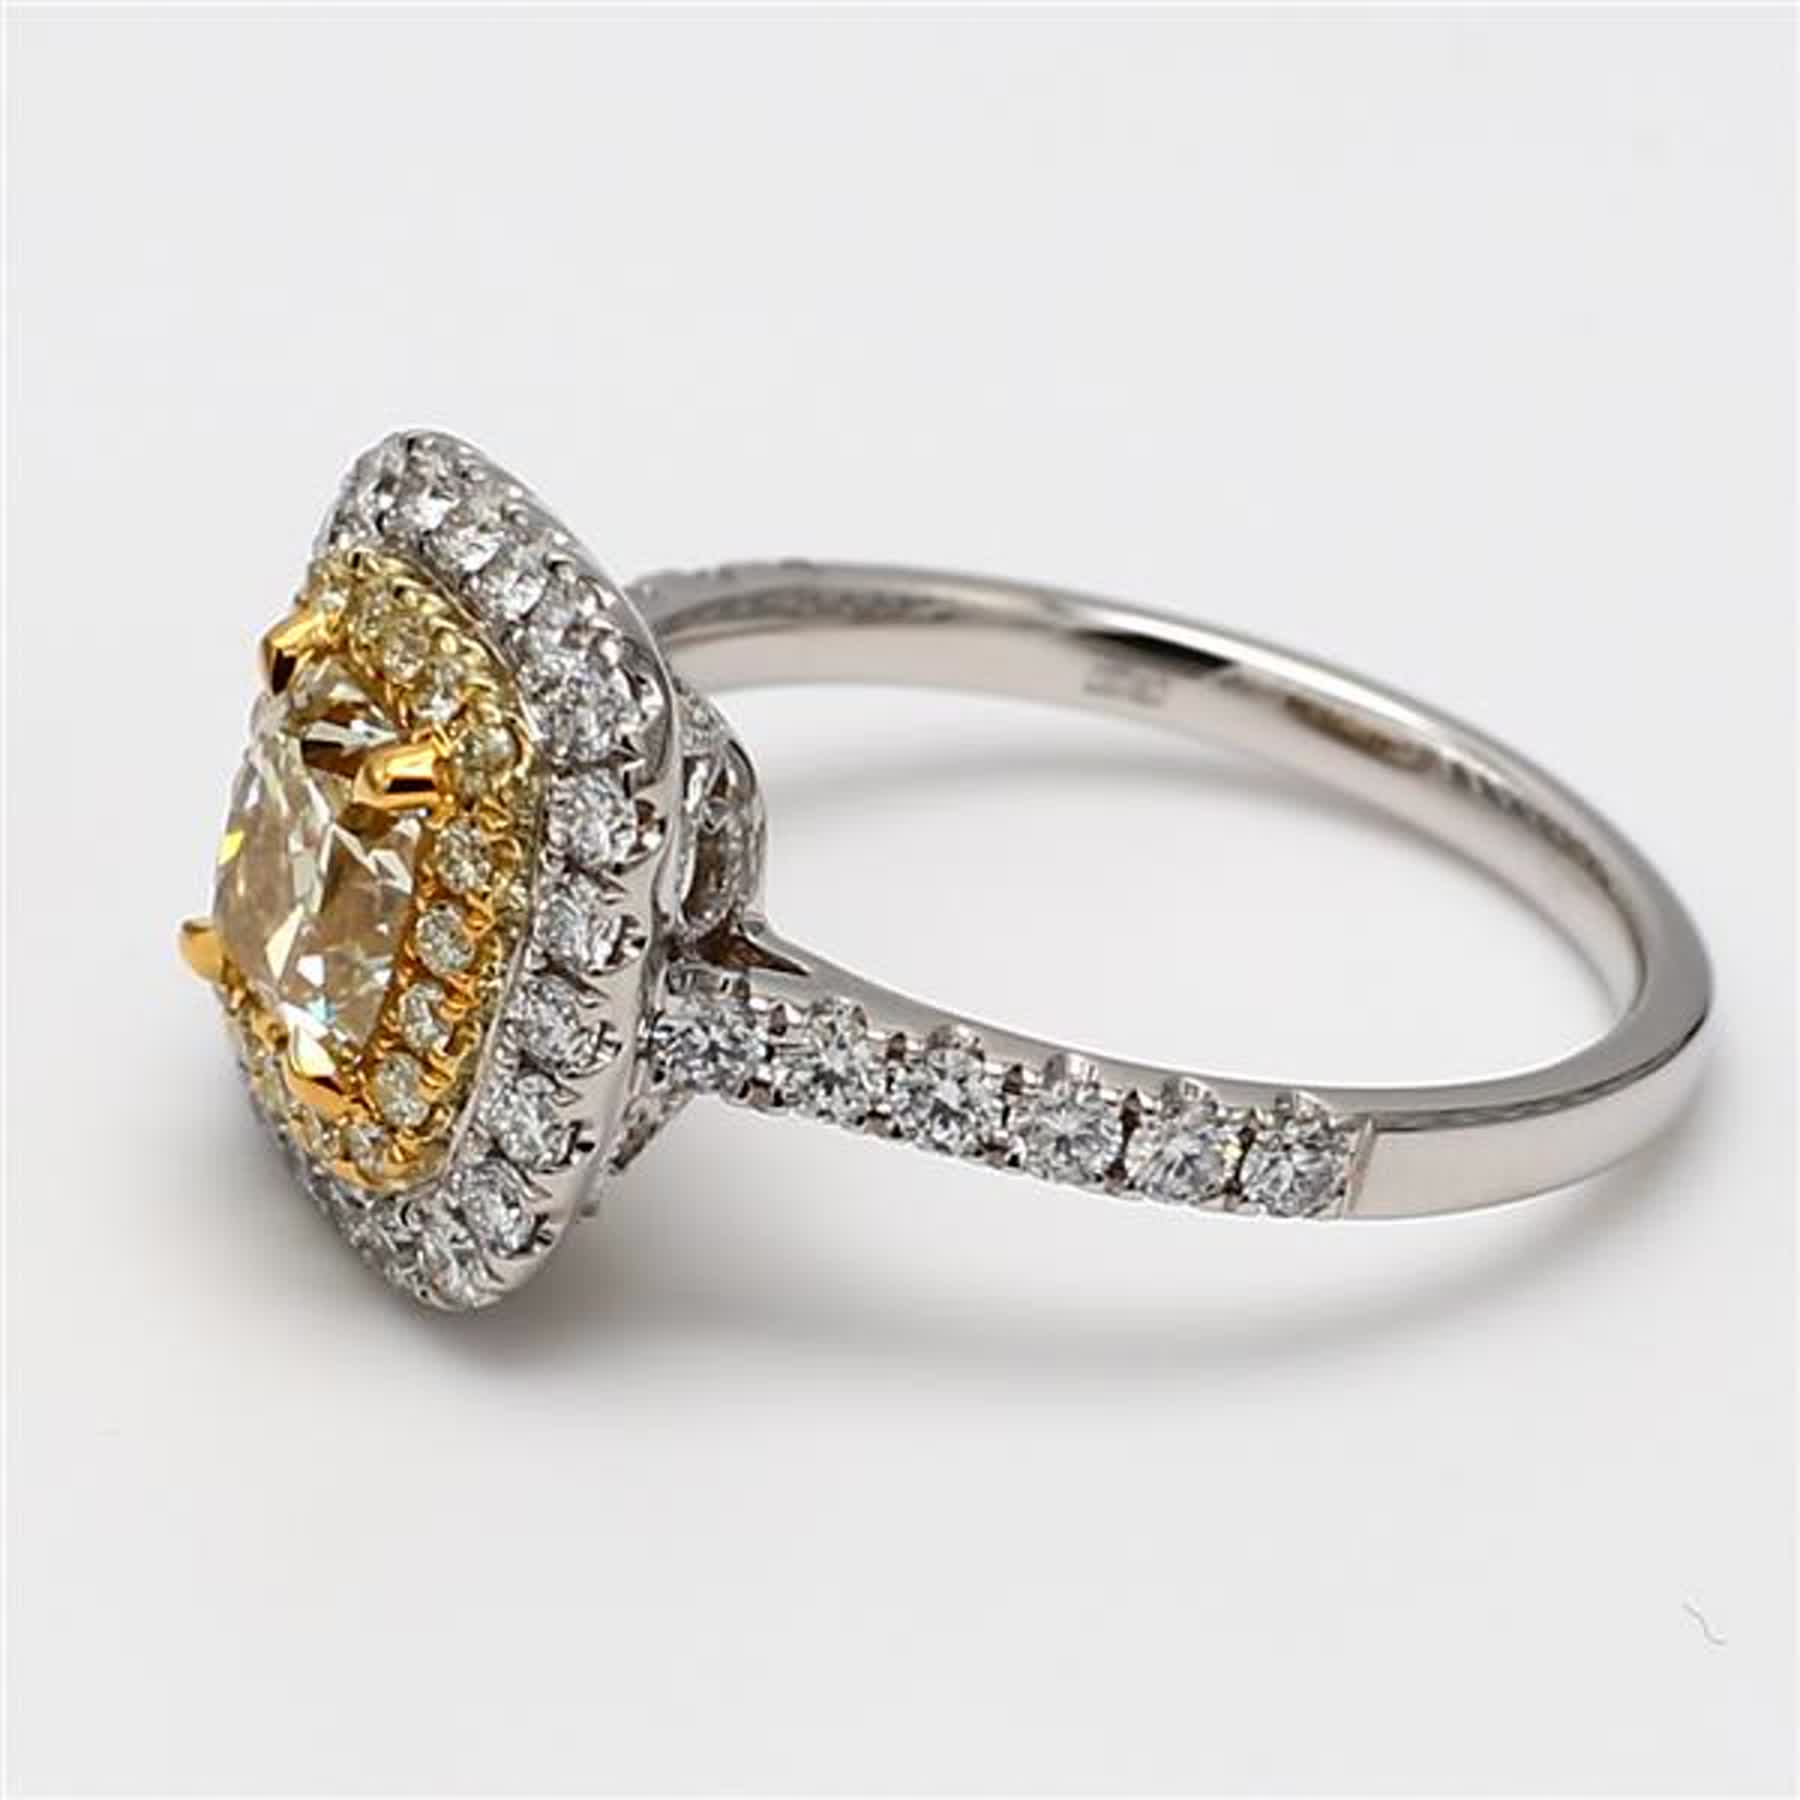 GIA Certified Natural Yellow Cushion and White Diamond 1.95 Carat TW Gold Ring